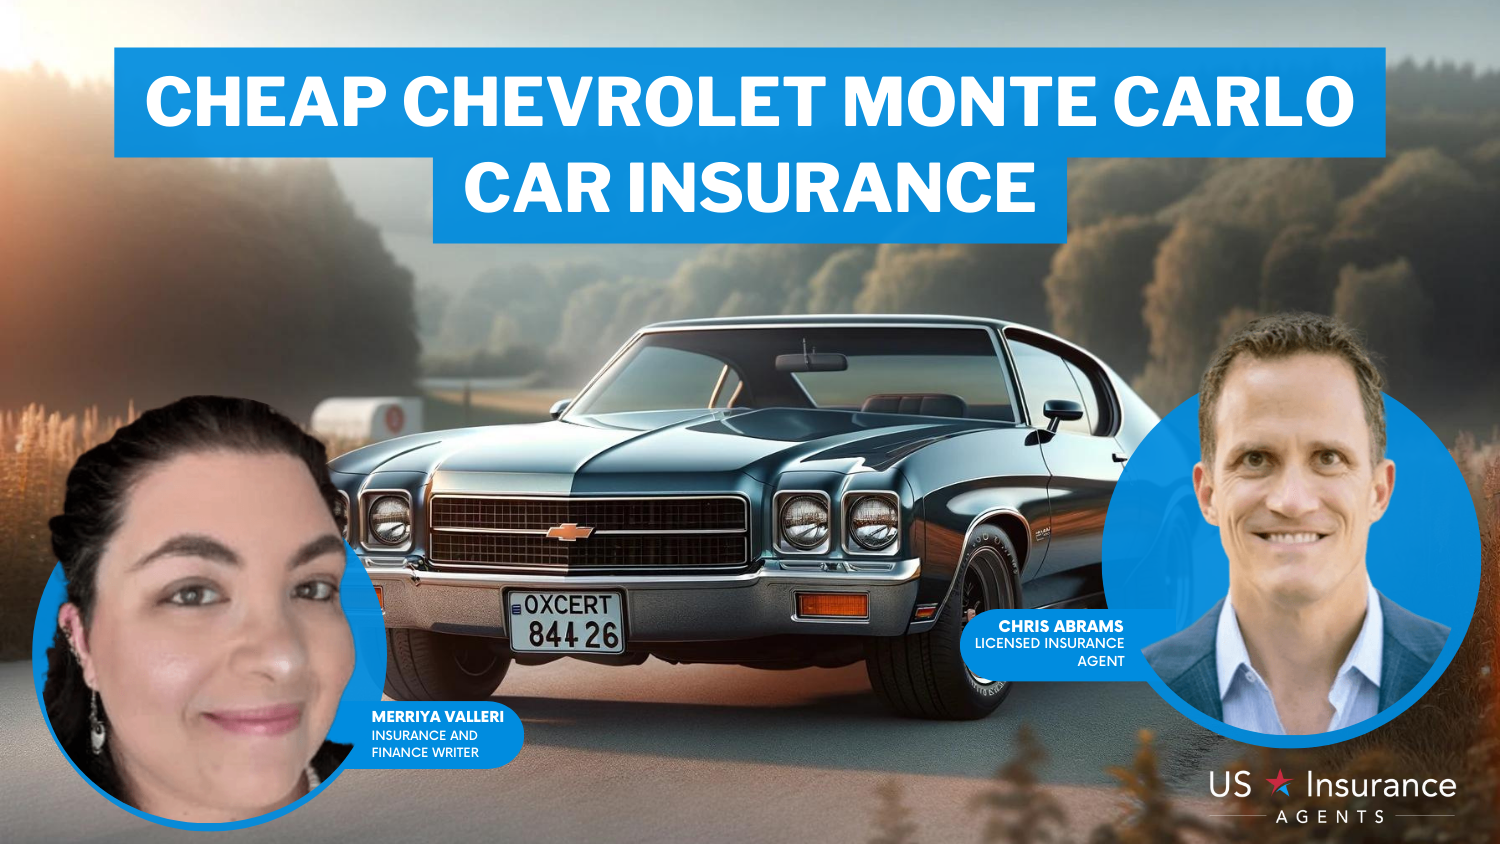 Erie, Travelers, and Safeco: Cheap Chevrolet Monte Carlo Car Insurance